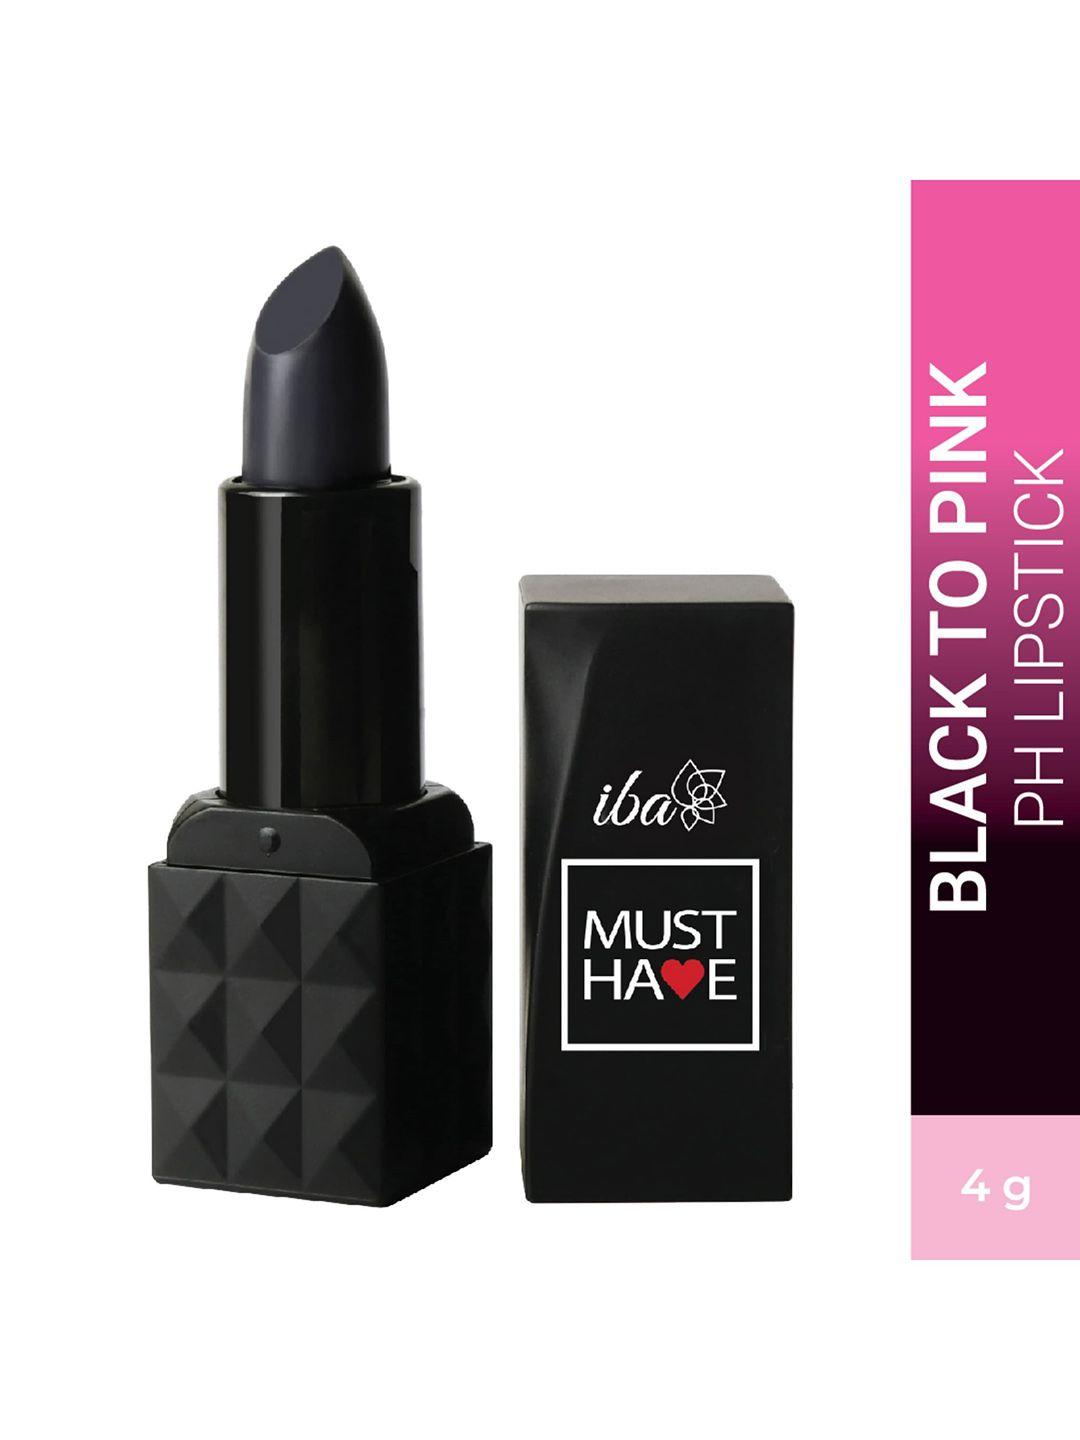 iba must have colour change ph bullet lipstick 4g - black to pink